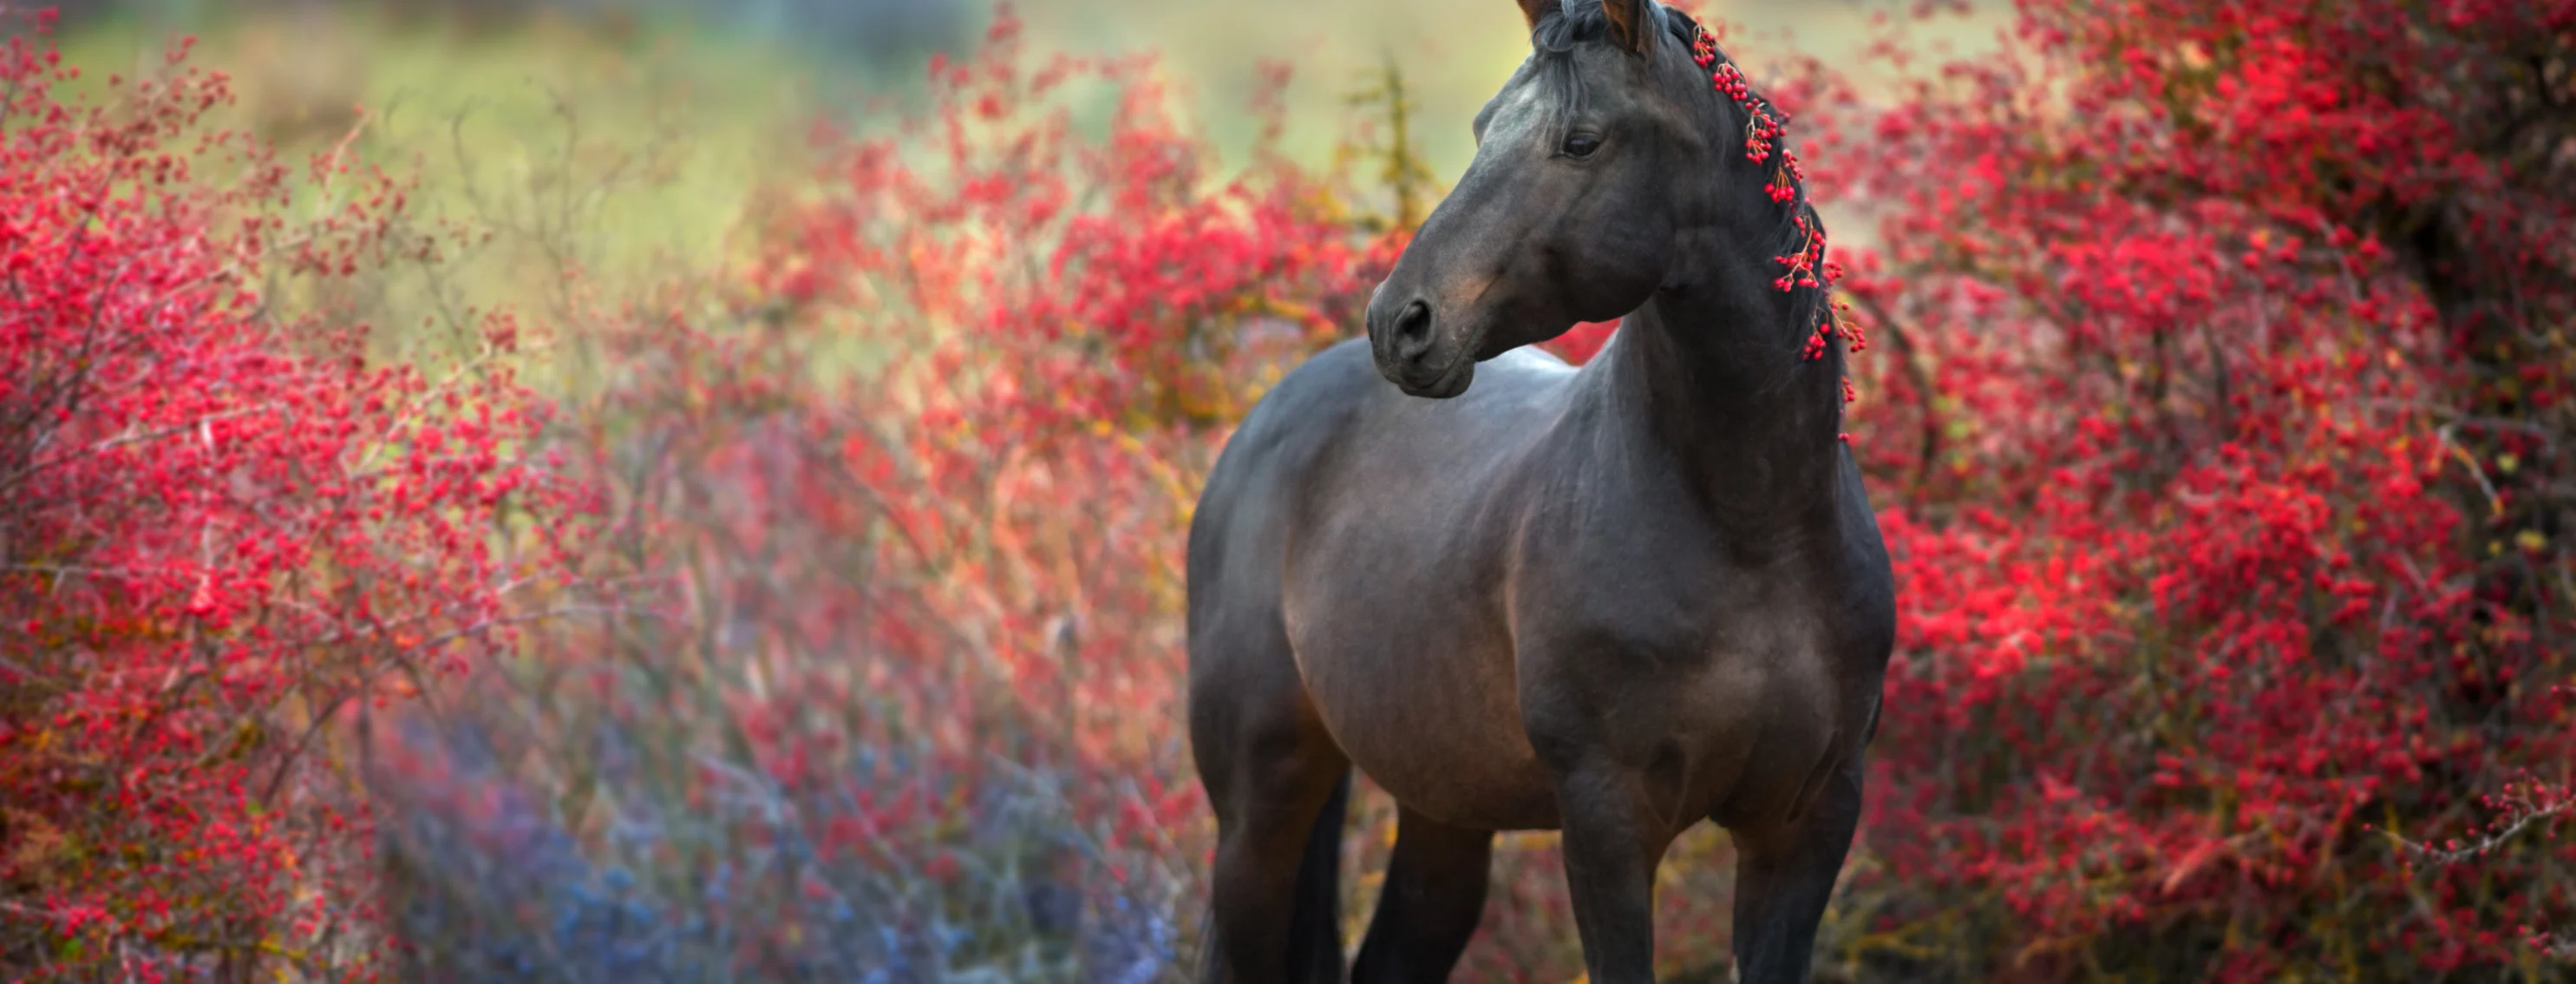 Horse in front of tree with red leaves